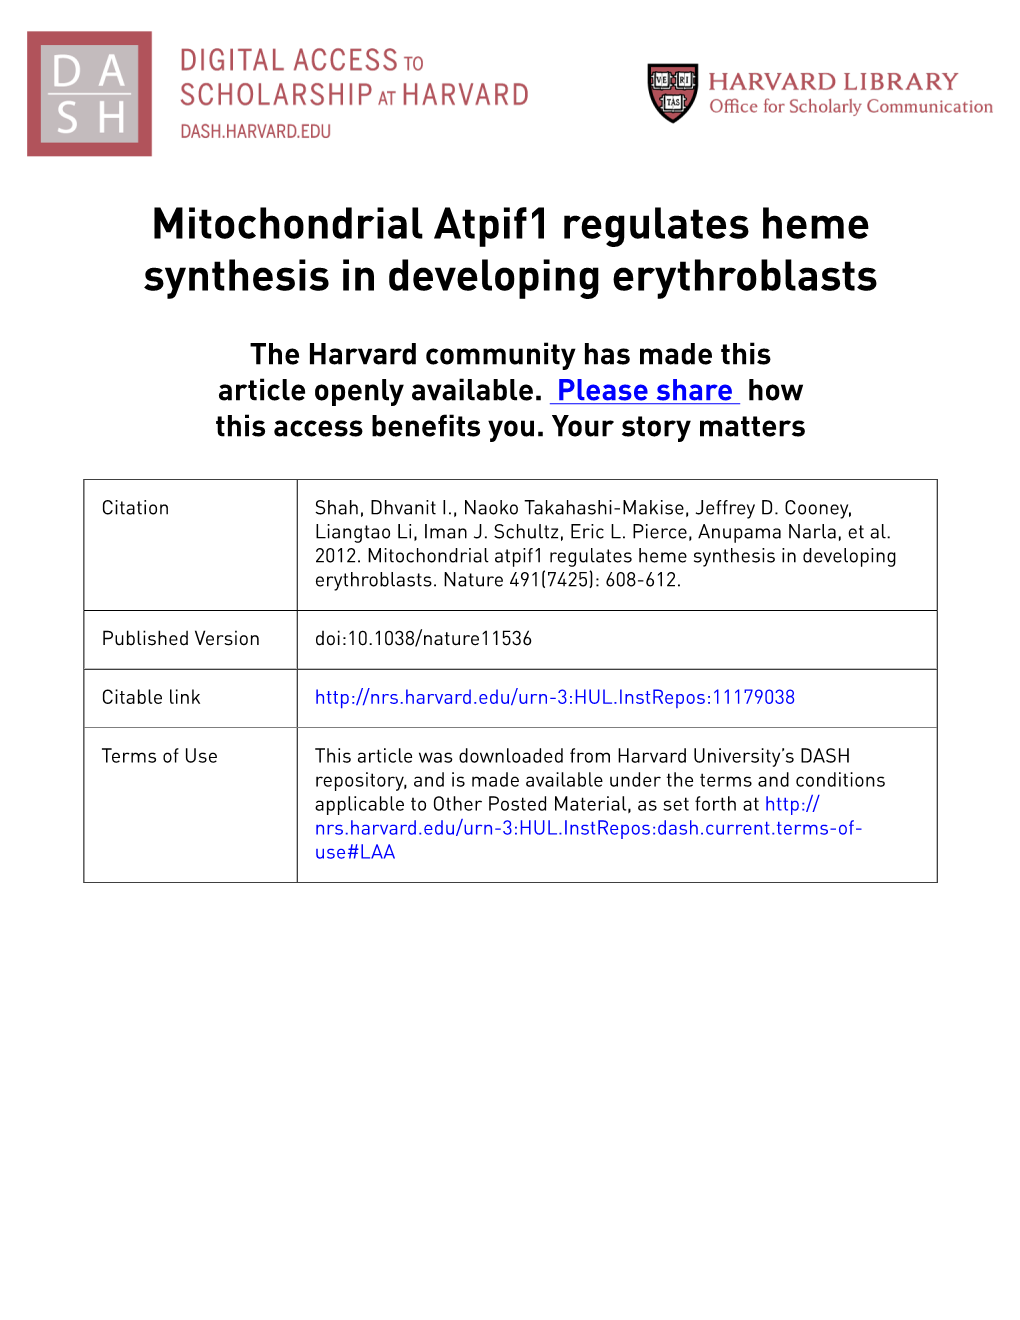 Mitochondrial Atpif1 Regulates Heme Synthesis in Developing Erythroblasts